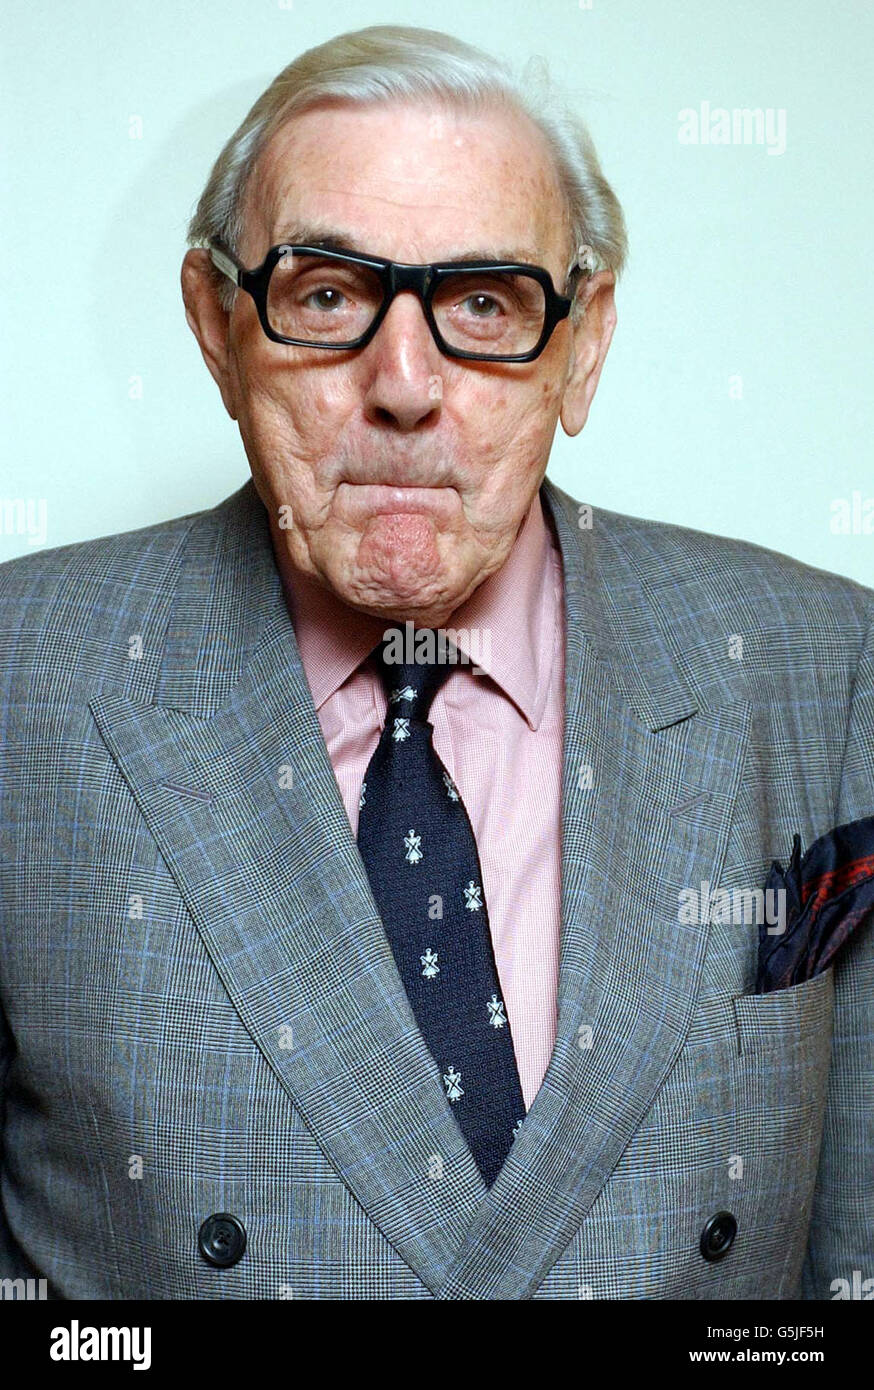 Eric Sykes arrives at the Evening Standard Theatre Awards at The Savoy Hotel in central London. 05/02/02 PA library picture dated 26/11/2001 of veteran comedian Eric Sykes, who has been named Oldie of the Year in the annual senior citizens' award ceremony, Tuesday February 05, 2002. Monthly magazine The Oldie was also celebrating its tenth birthday at the annual ceremony which the publication began. TV stars Ian Hislop and Harry Enfield were among the high-profile celebrities attending the central London ceremony. Stock Photo